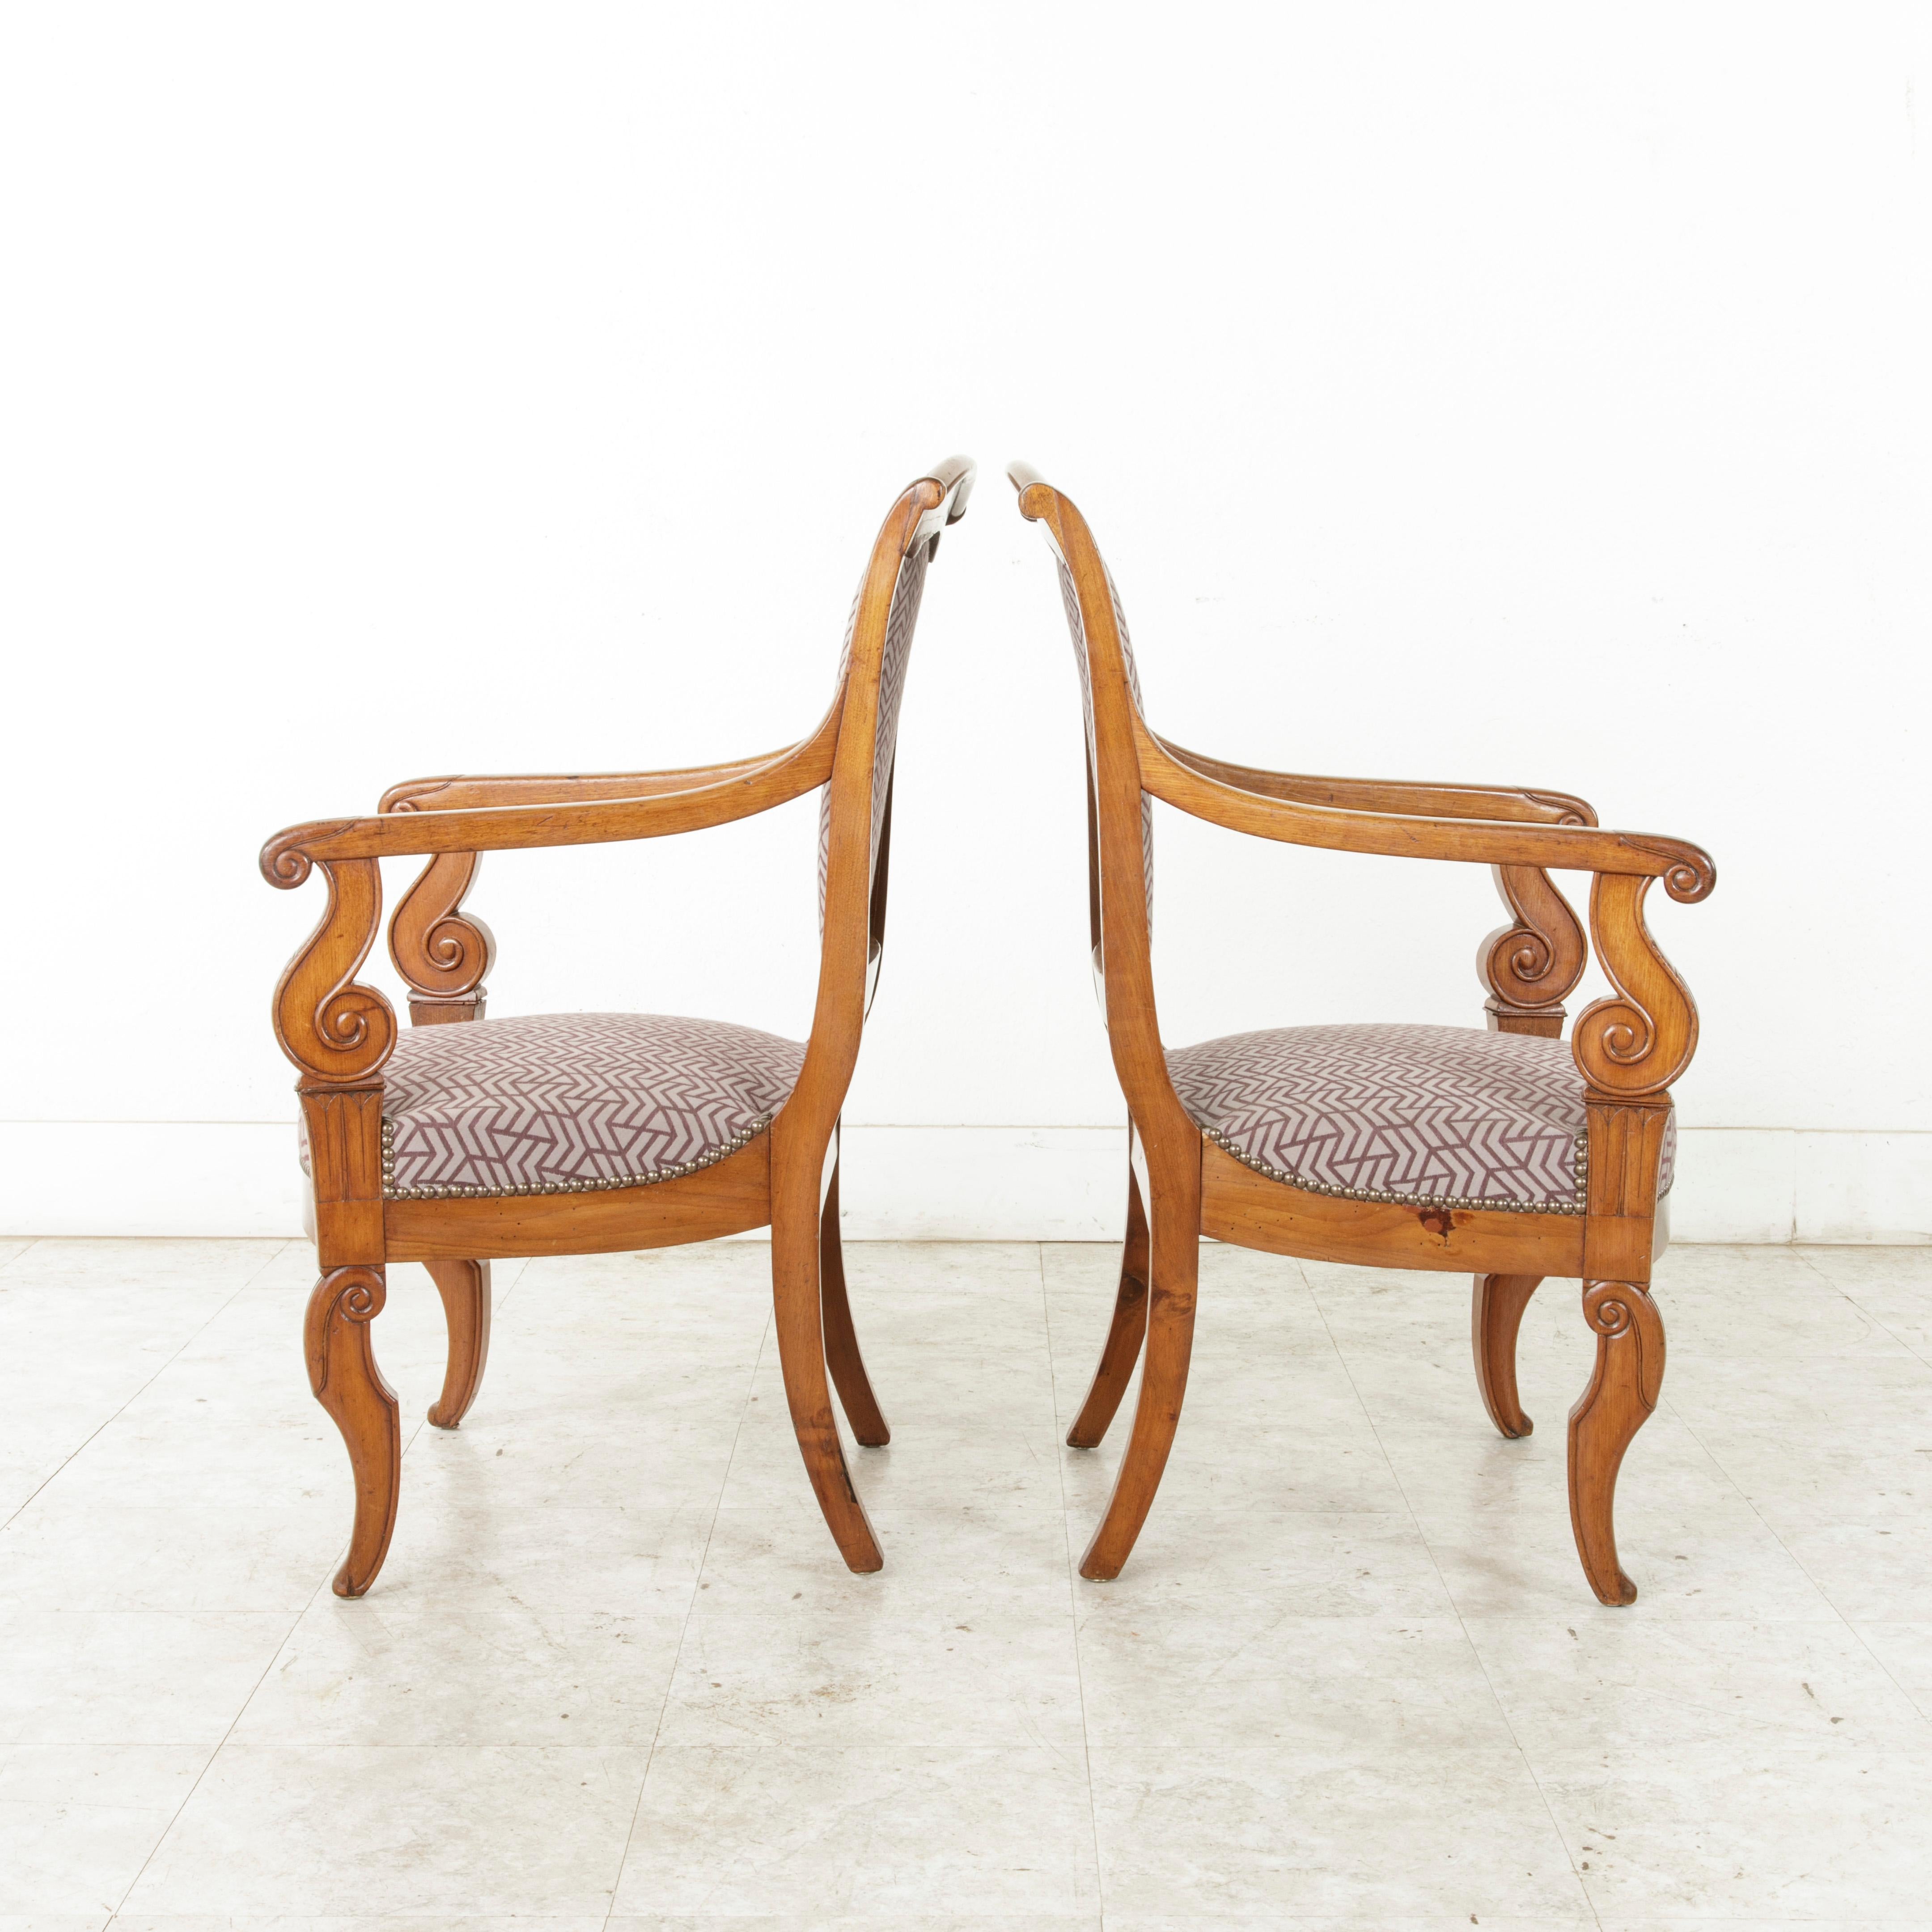 Upholstery Pair of Mid-19th Century French Restauration Period Walnut Armchairs or Bergeres